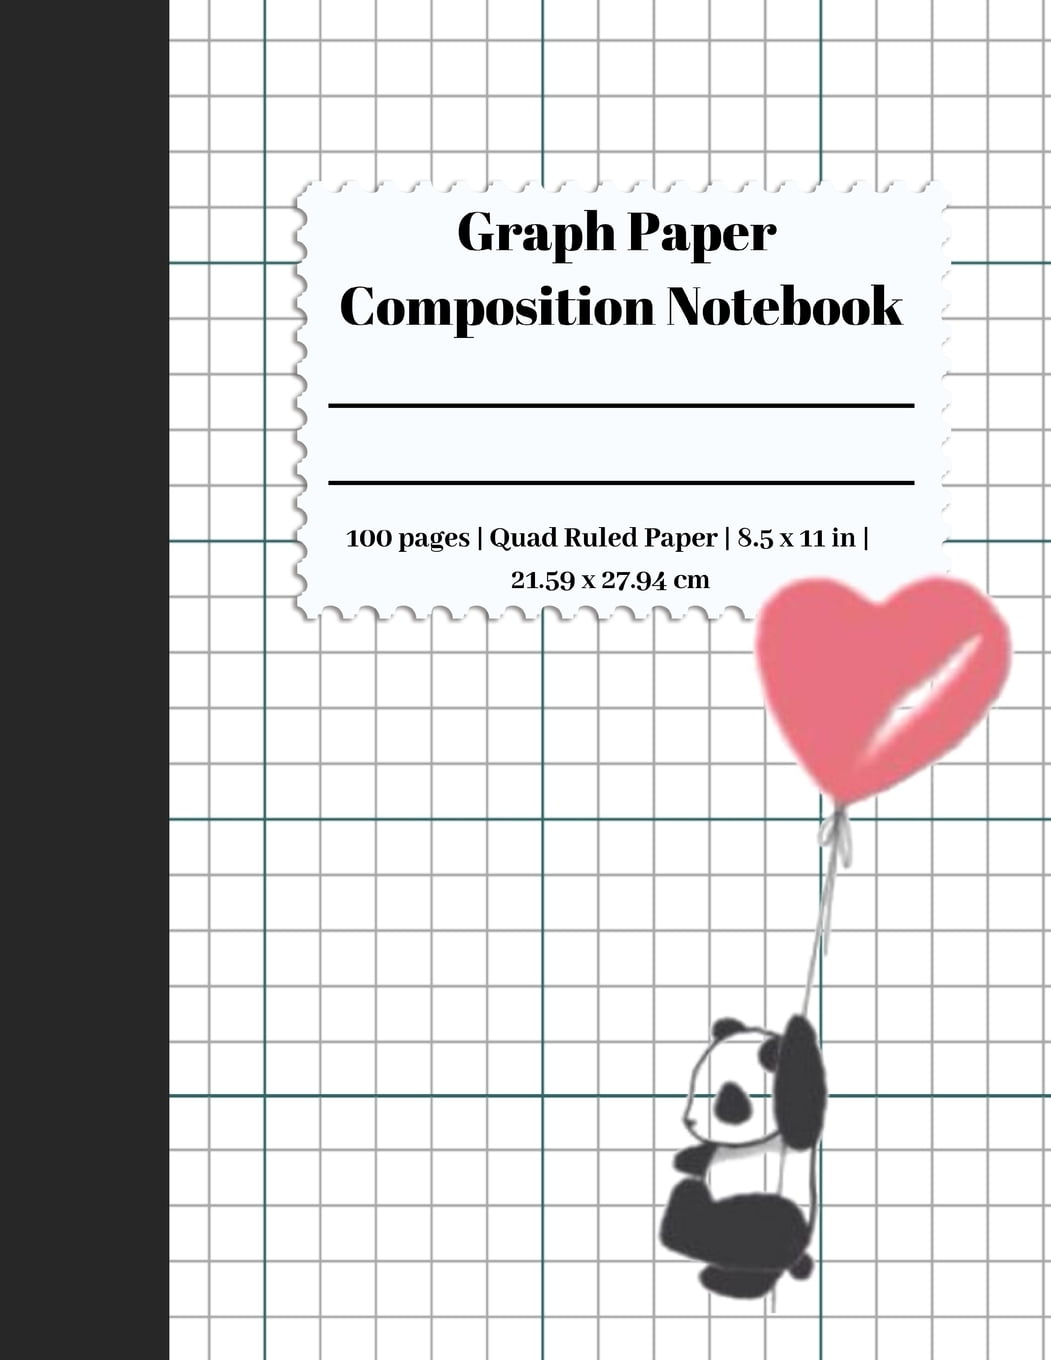 paper-composition-notebook-graph-paper-composition-notebook-5